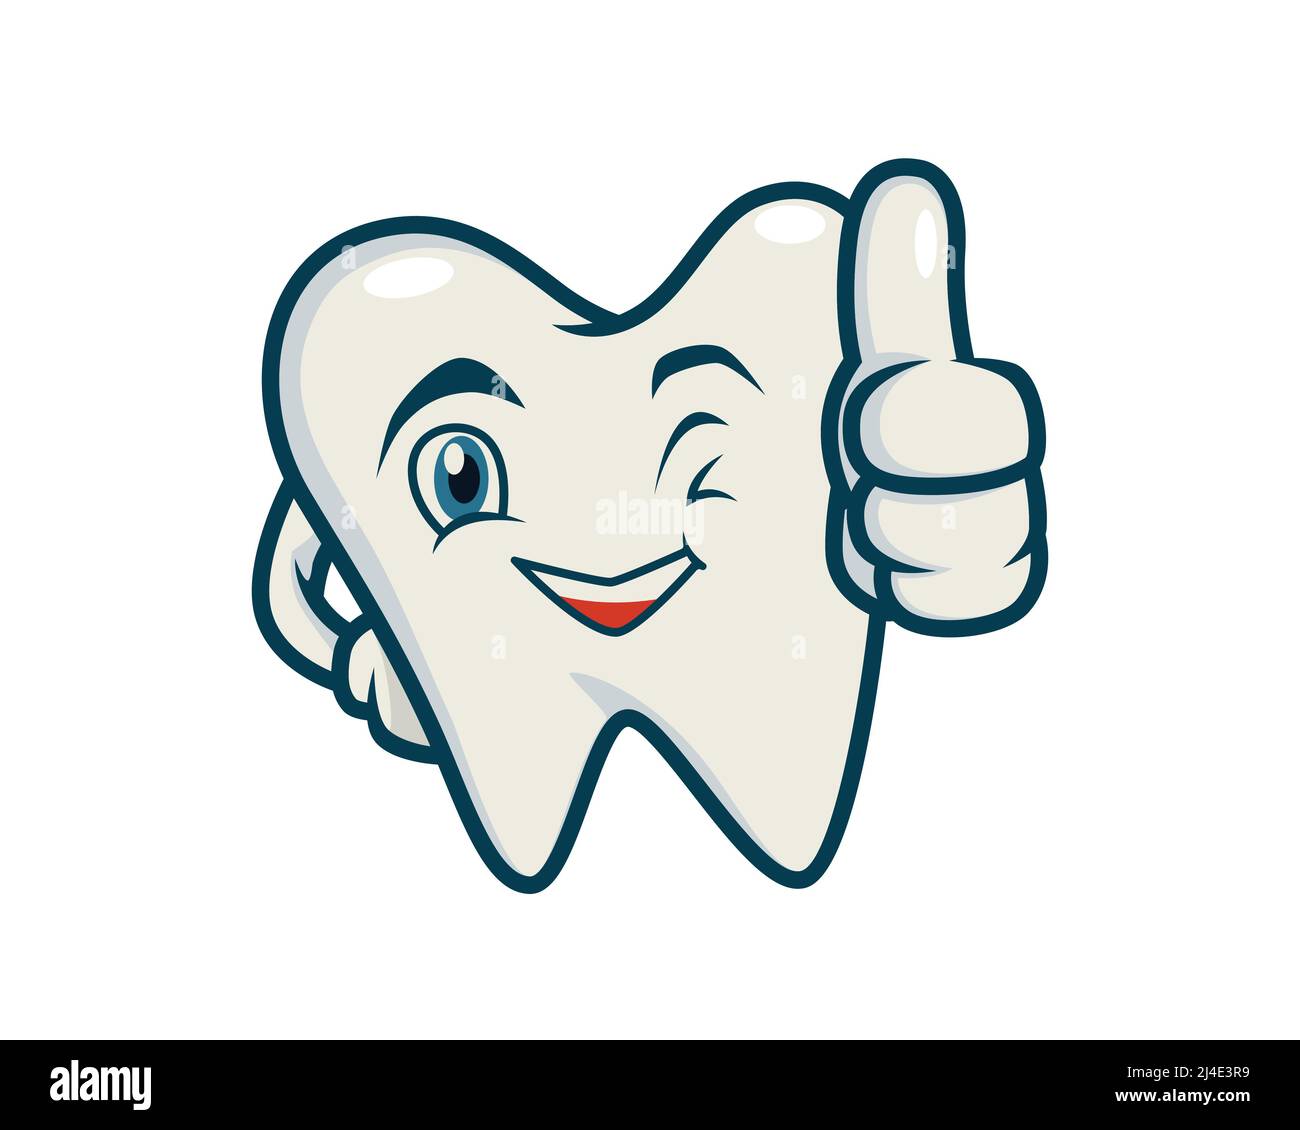 Humbly and Friendly Tooth Recommending Gesture Vector Stock Vector